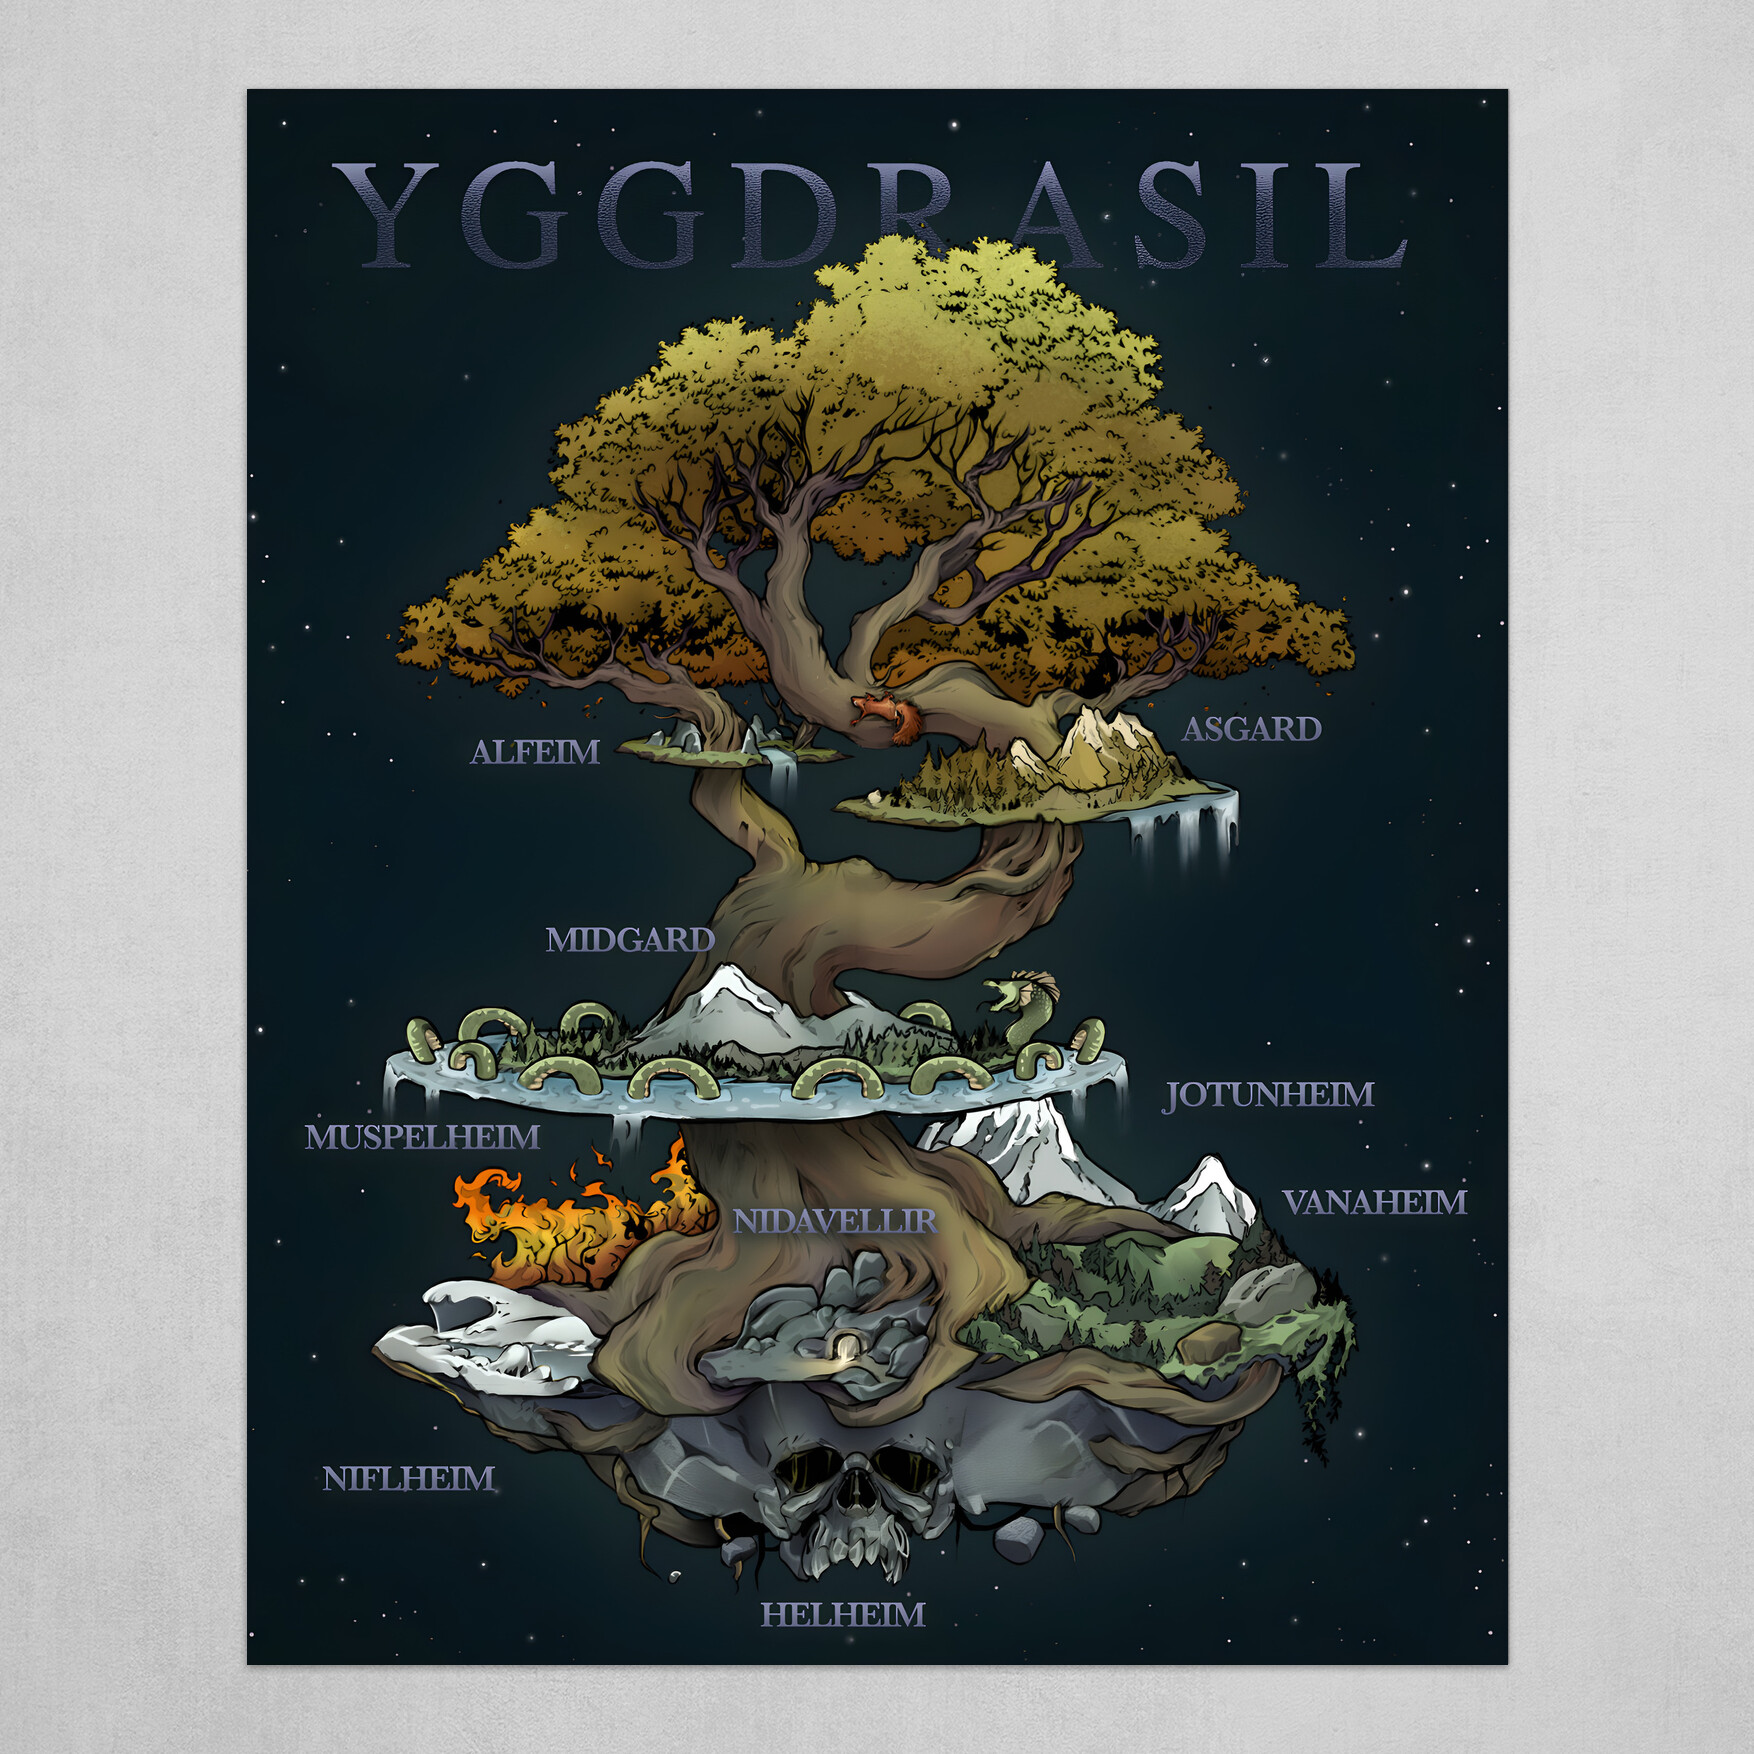 Yggdrasil and the 9 worlds of Norse Mythology